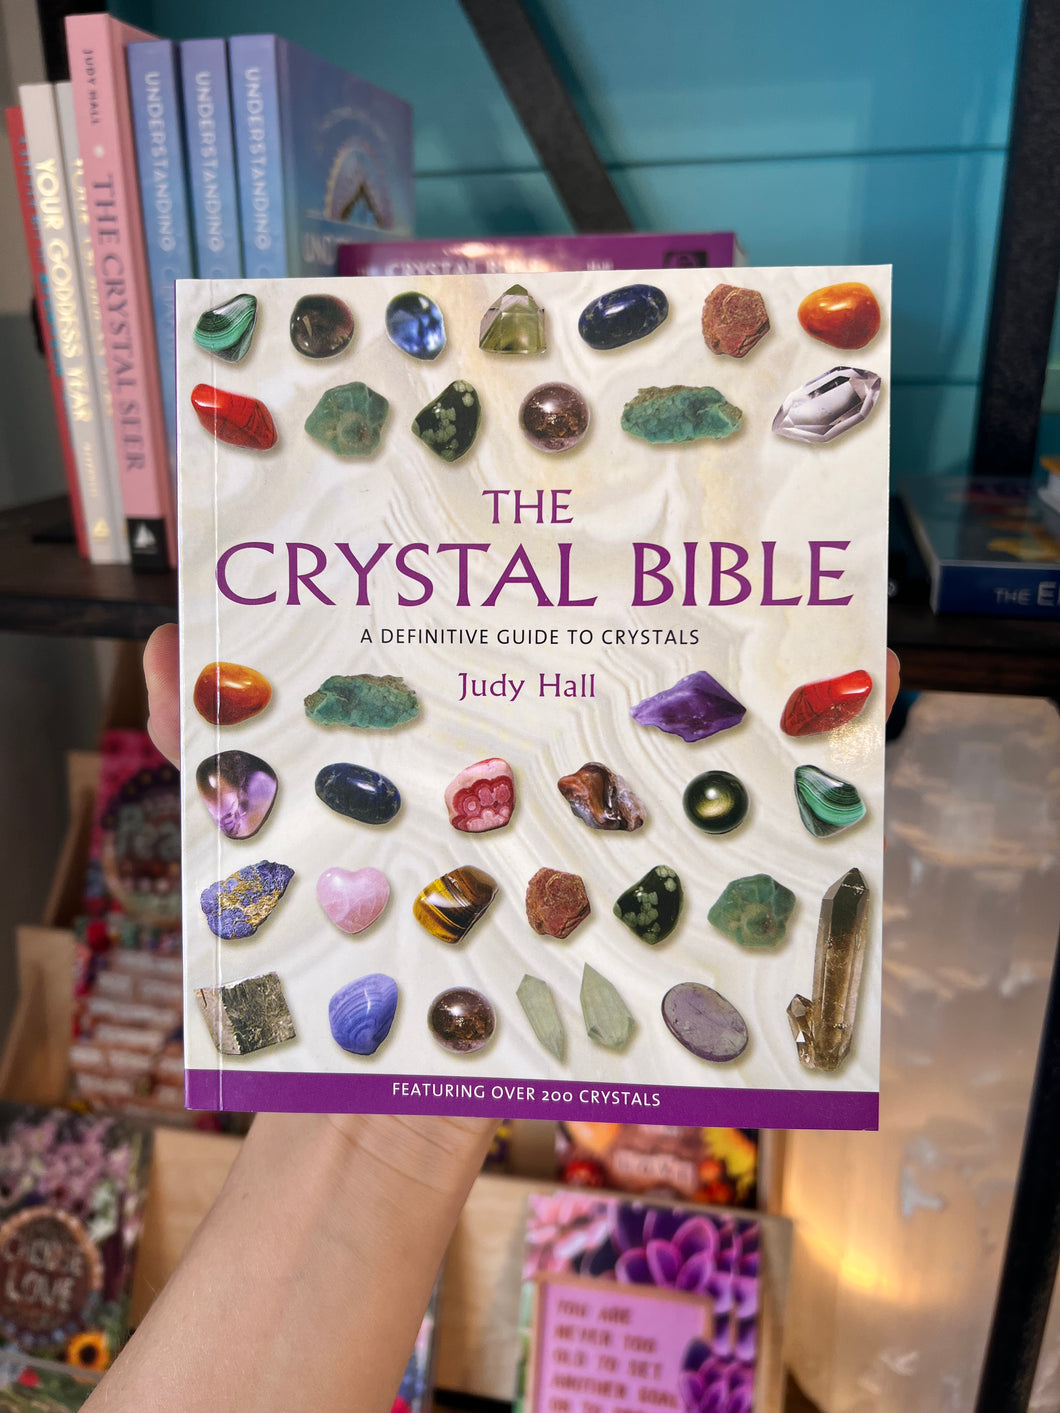 THE CRYSTAL BIBLE